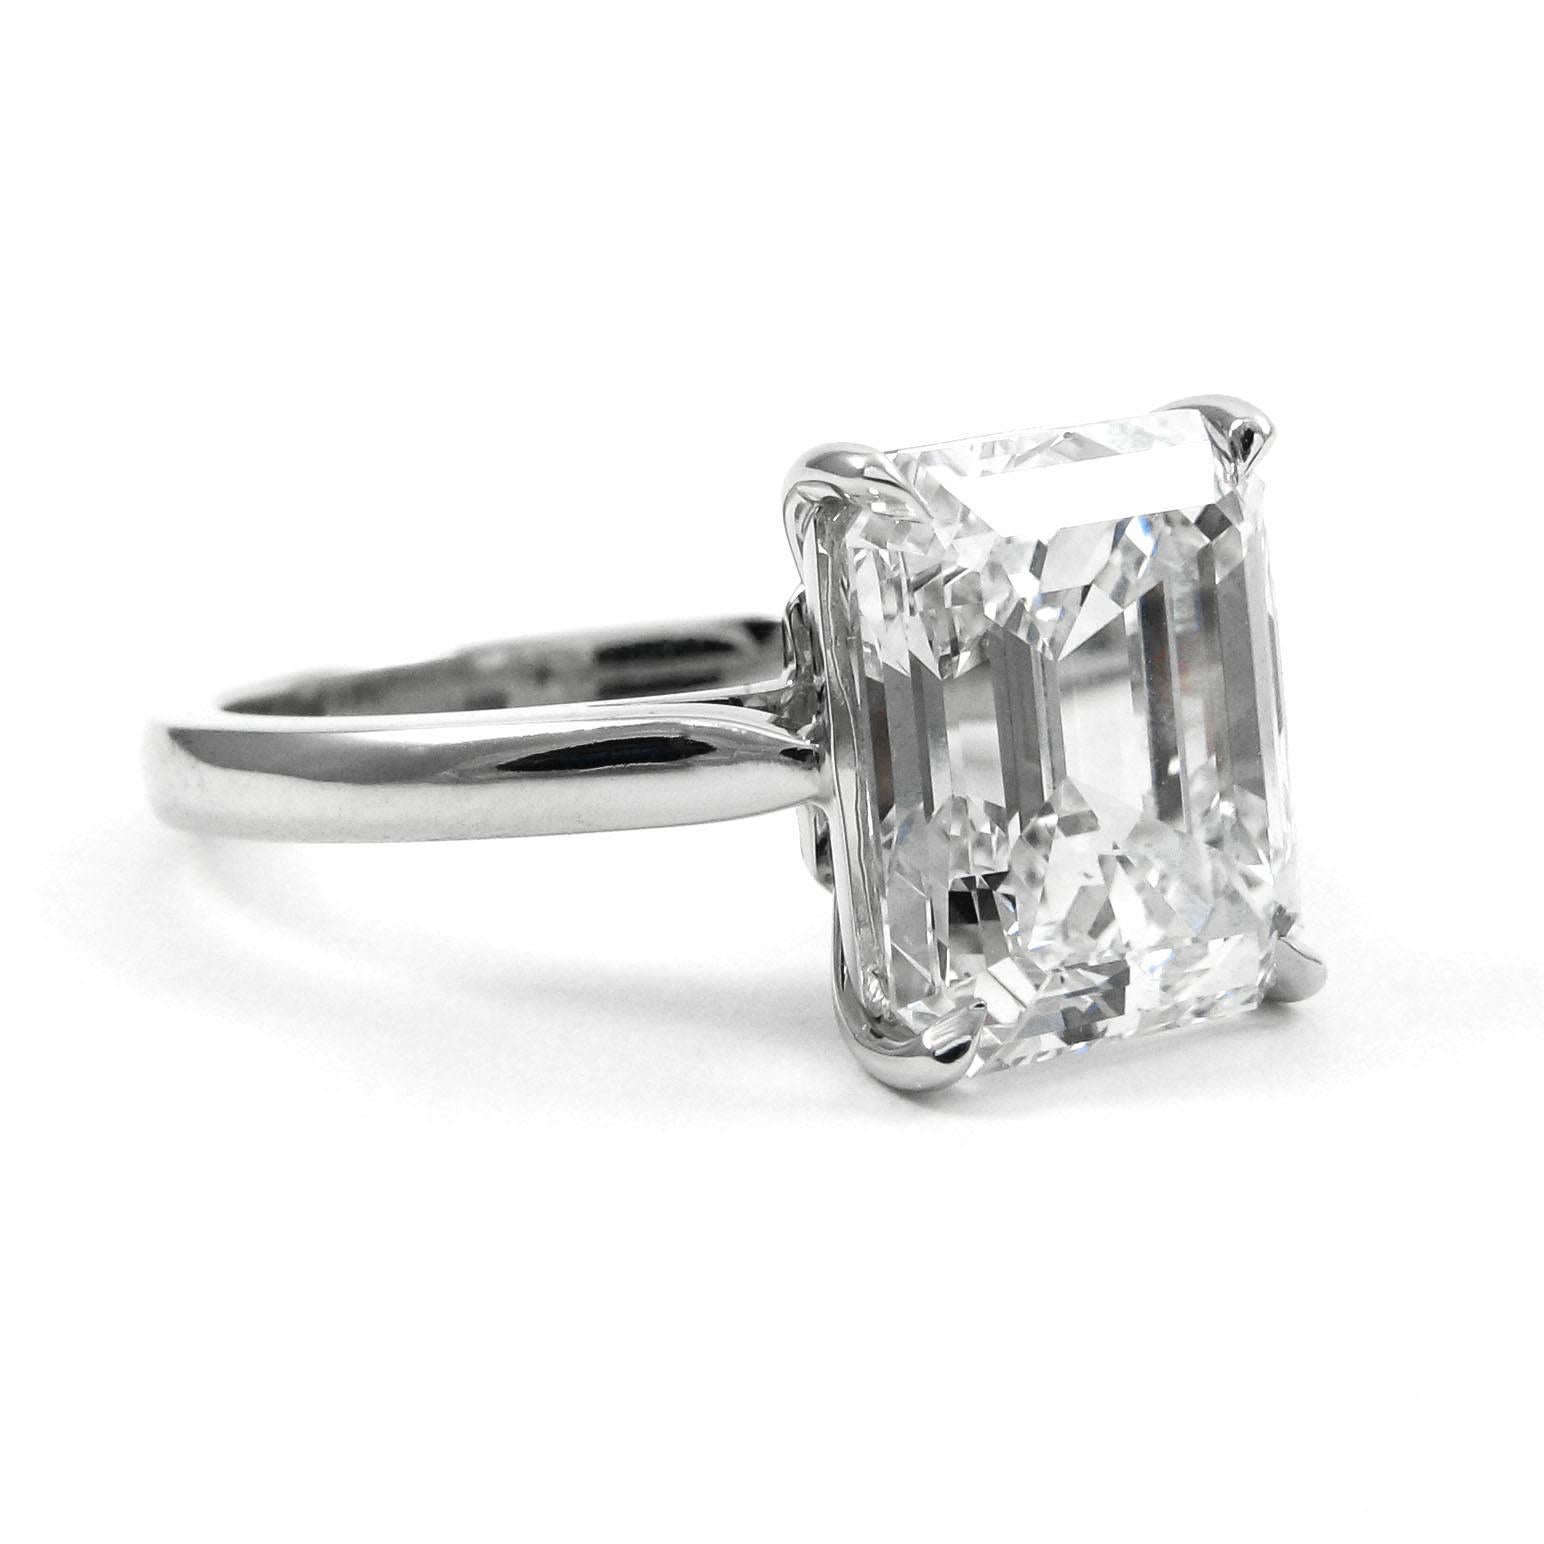 This elegant, high quality, and quite substantial 1.20 carat emerald cut diamond has excellent VS2 clarity, beautiful white color, and a bright, lively, sophisticated cut! This is a very well cut diamond and has an amazing faceting pattern that